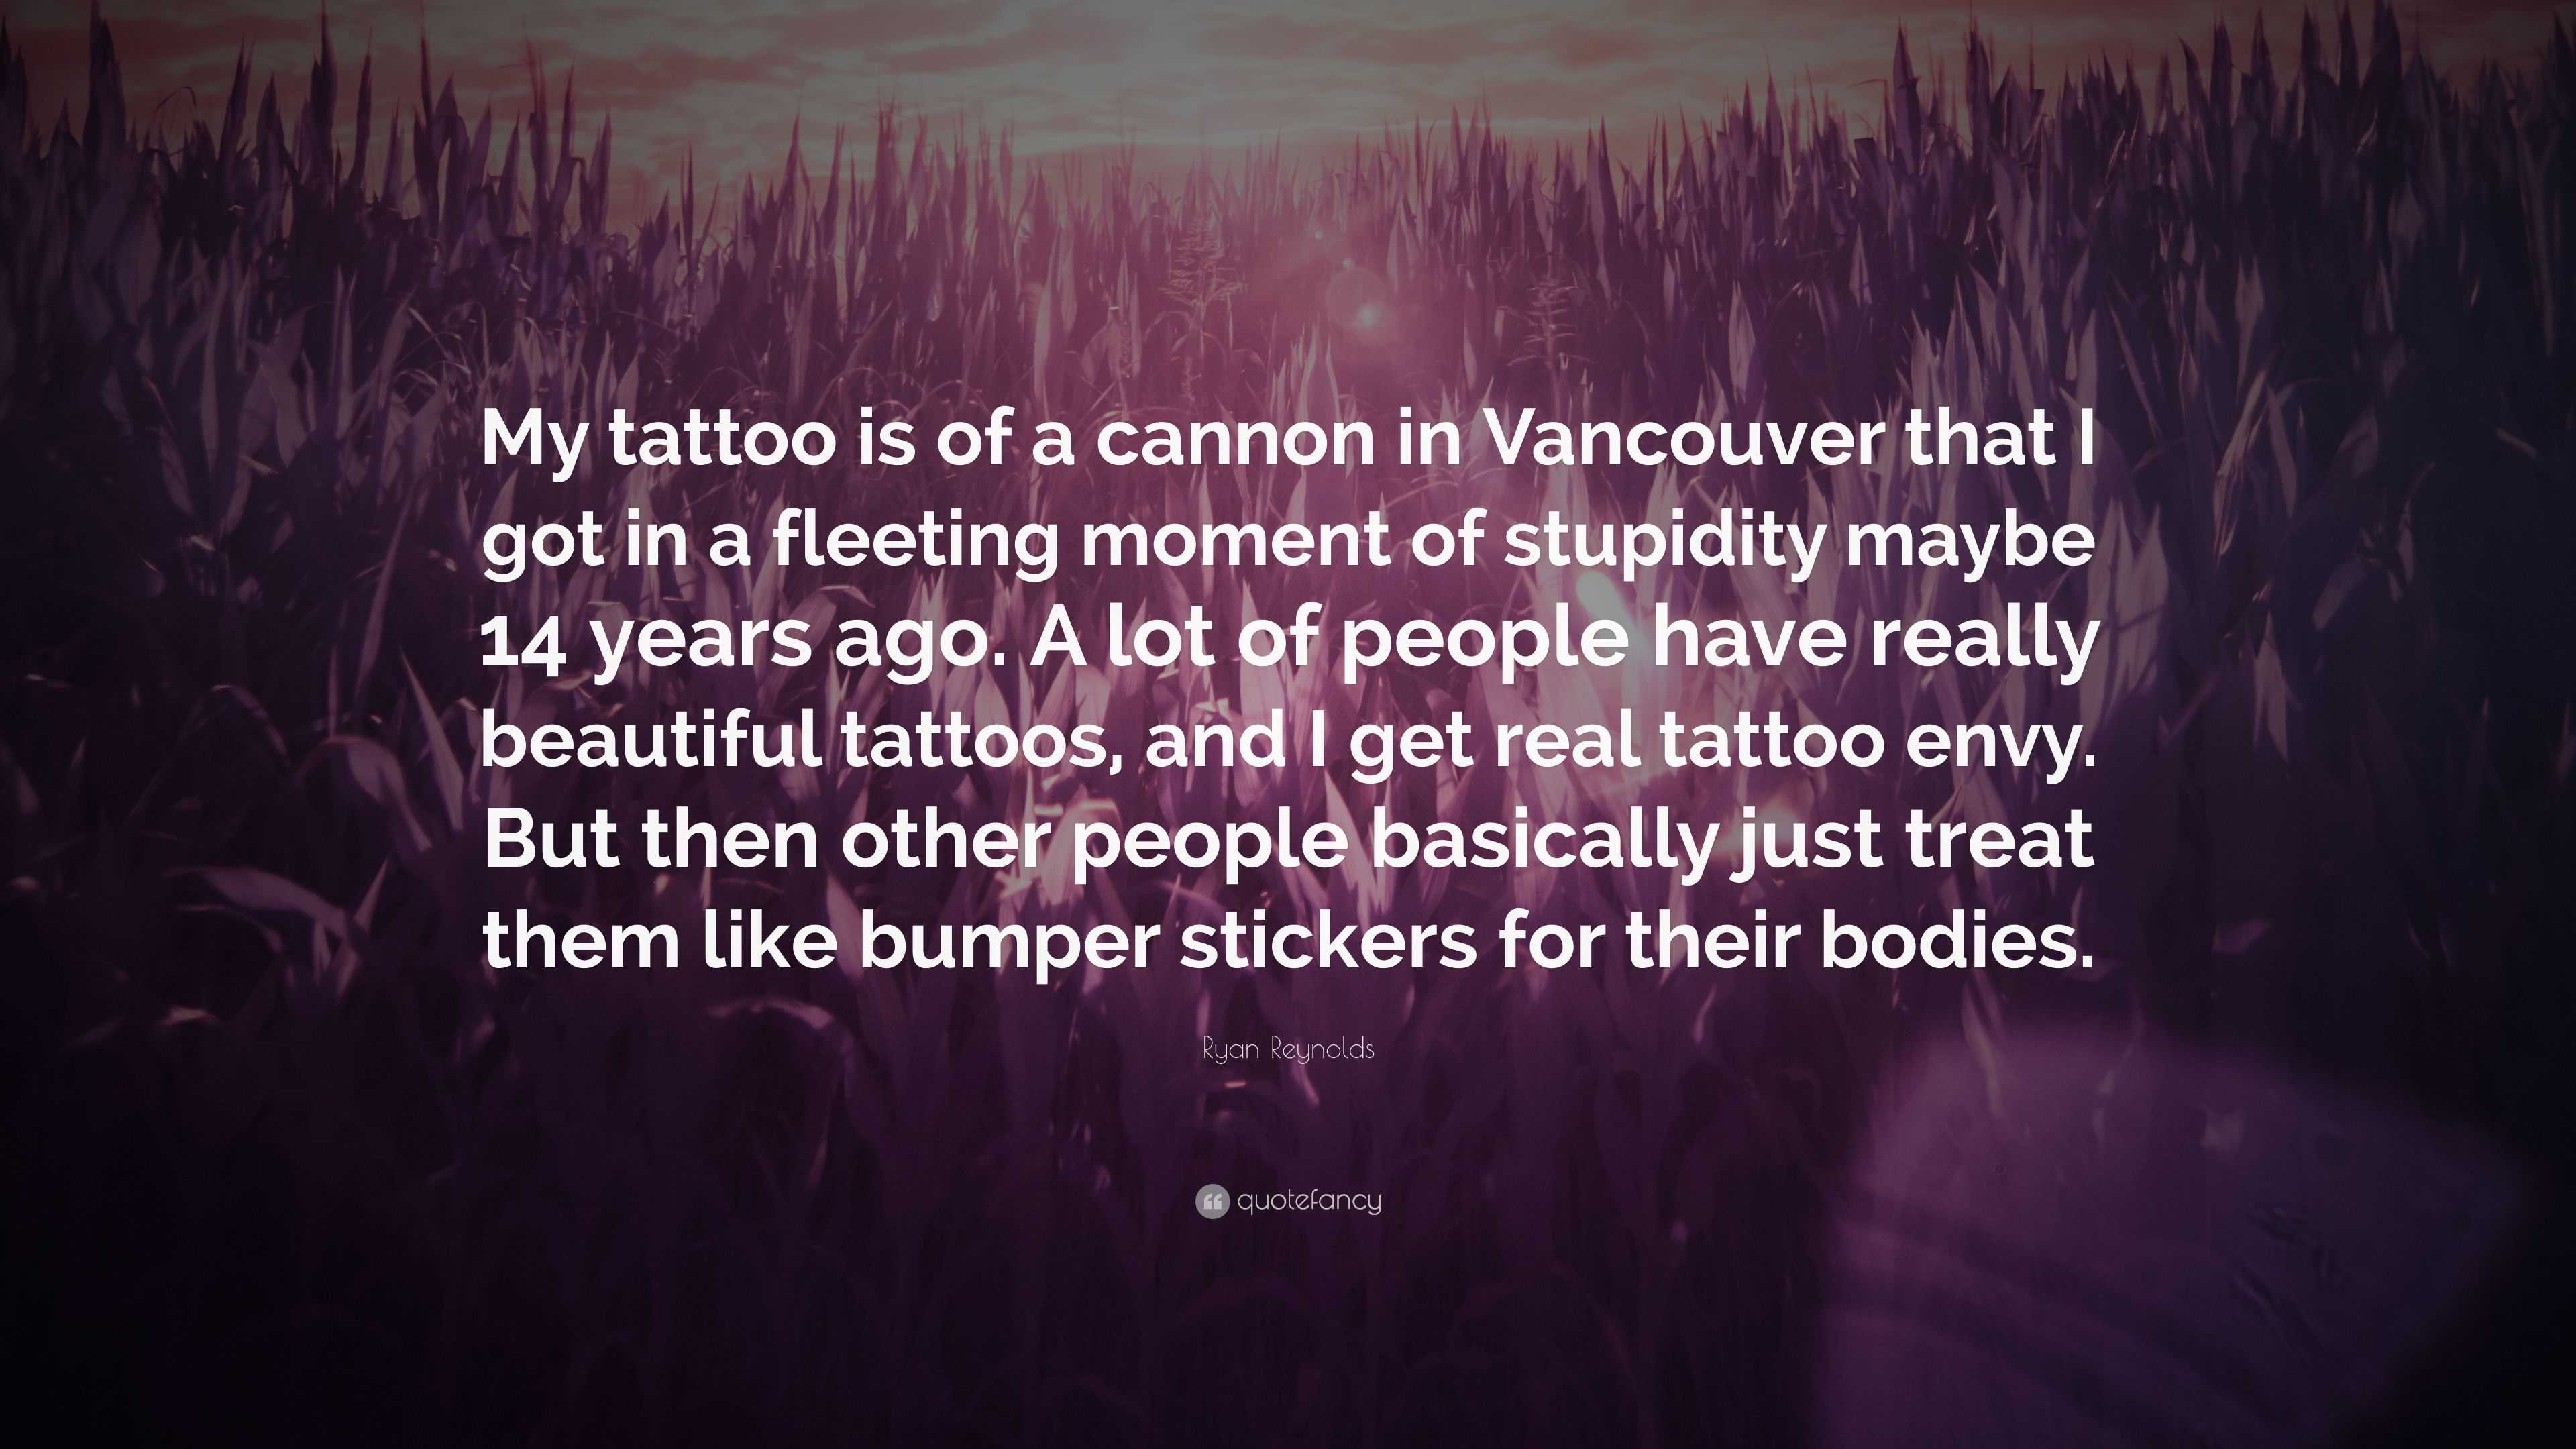 Ryan Reynolds Quote: “My tattoo is of a cannon in Vancouver that I got in a fleeting moment of stupidity maybe 14 years ago. A lot of people h...”